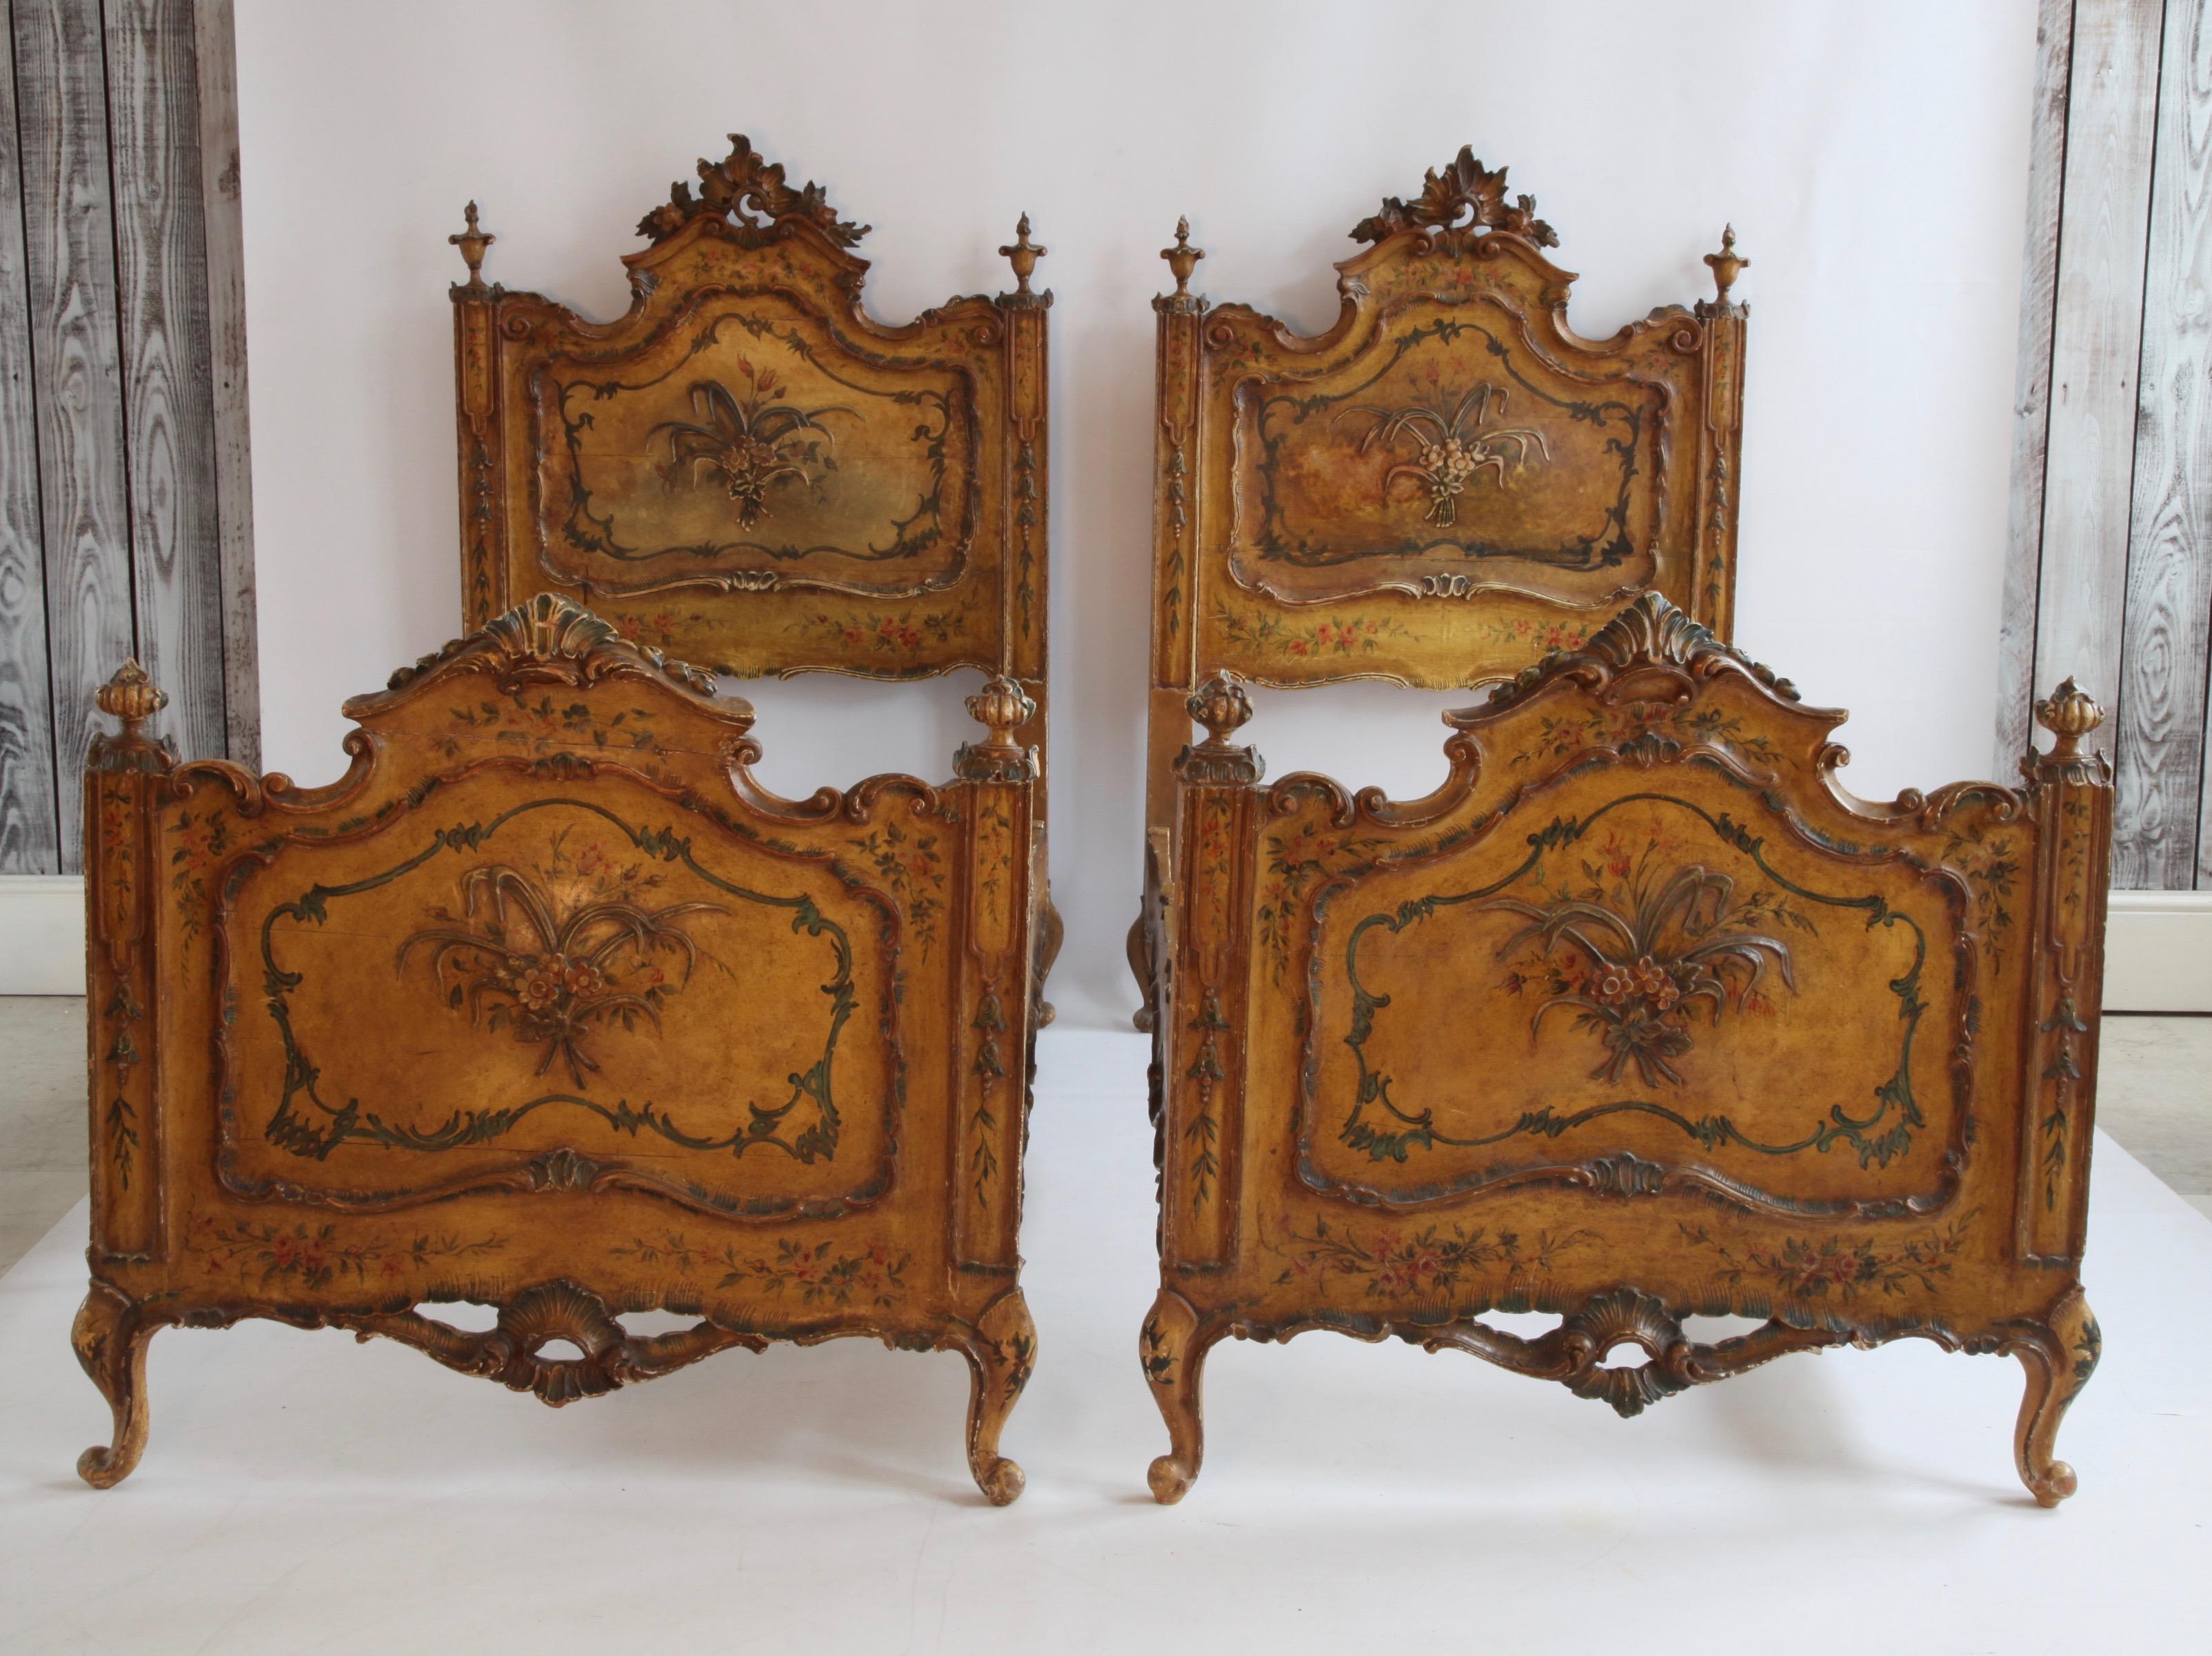 Pair of antique Venetian single beds.
Painted in Yellow ochre with floral motifs all around.